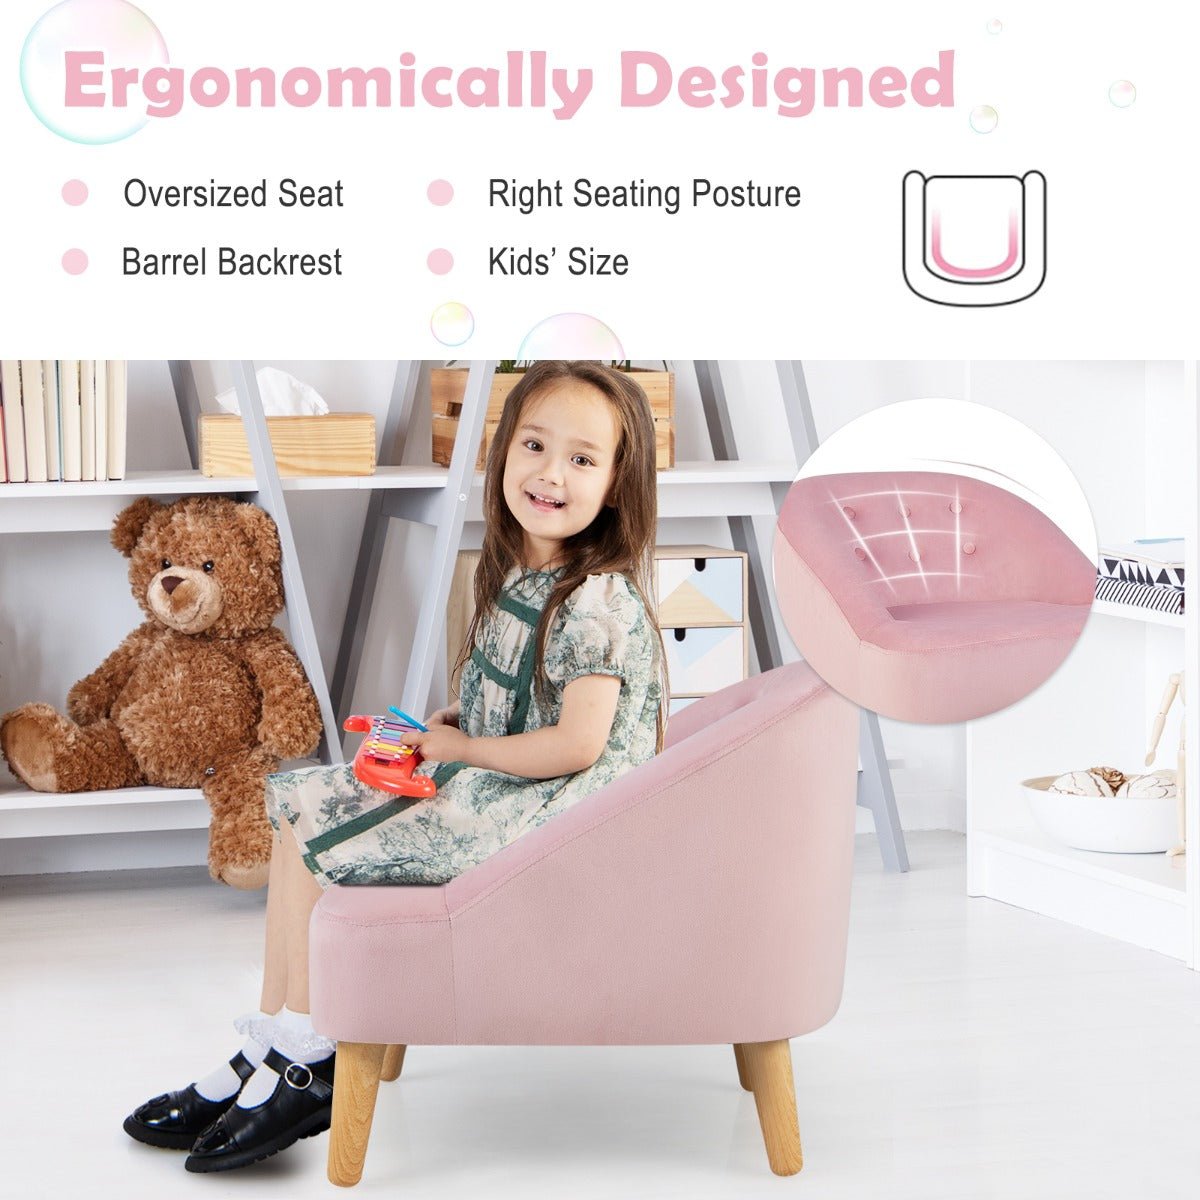 Kids Single Sofa Chair & Stool - Pink, Ages 3-5, Matching Pair